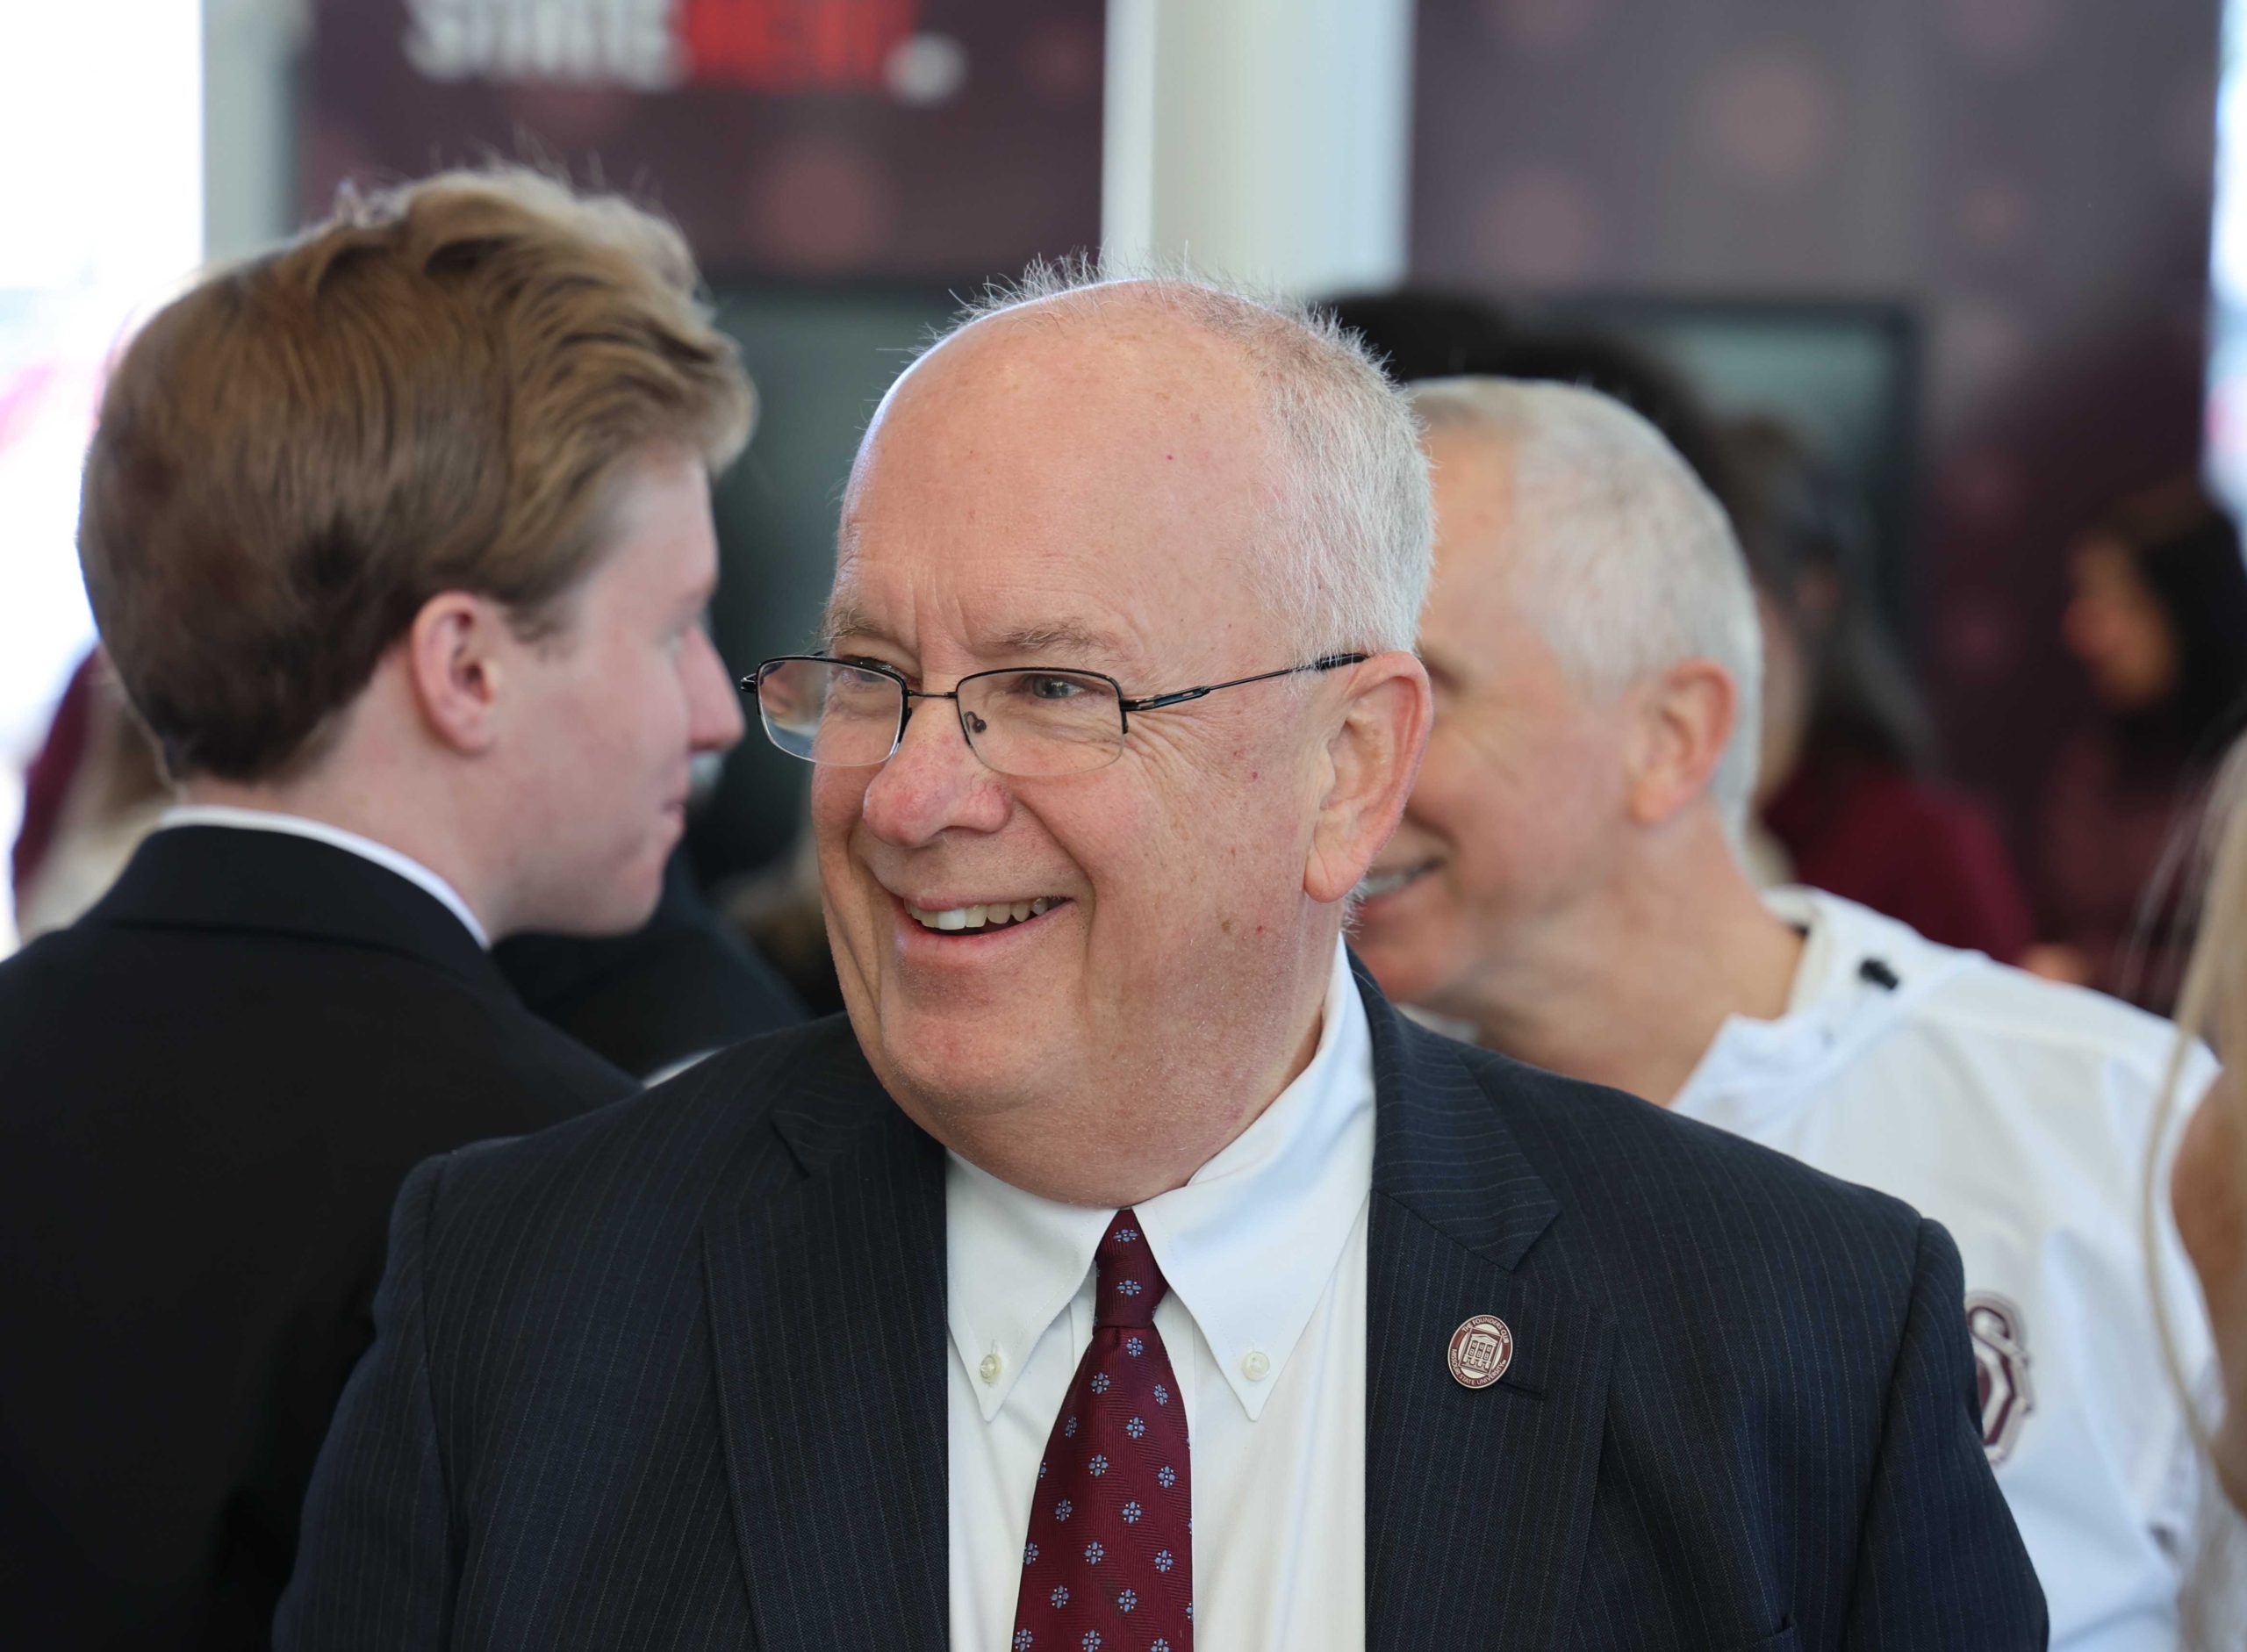 Missouri State University President Clif Smart mingles with the crowd before the announcement of an anonymous seven-figure donation for the school's new alumni center It will be called the Clifton M. Smart III Advancement Center. (Photo by Shannon Cay)